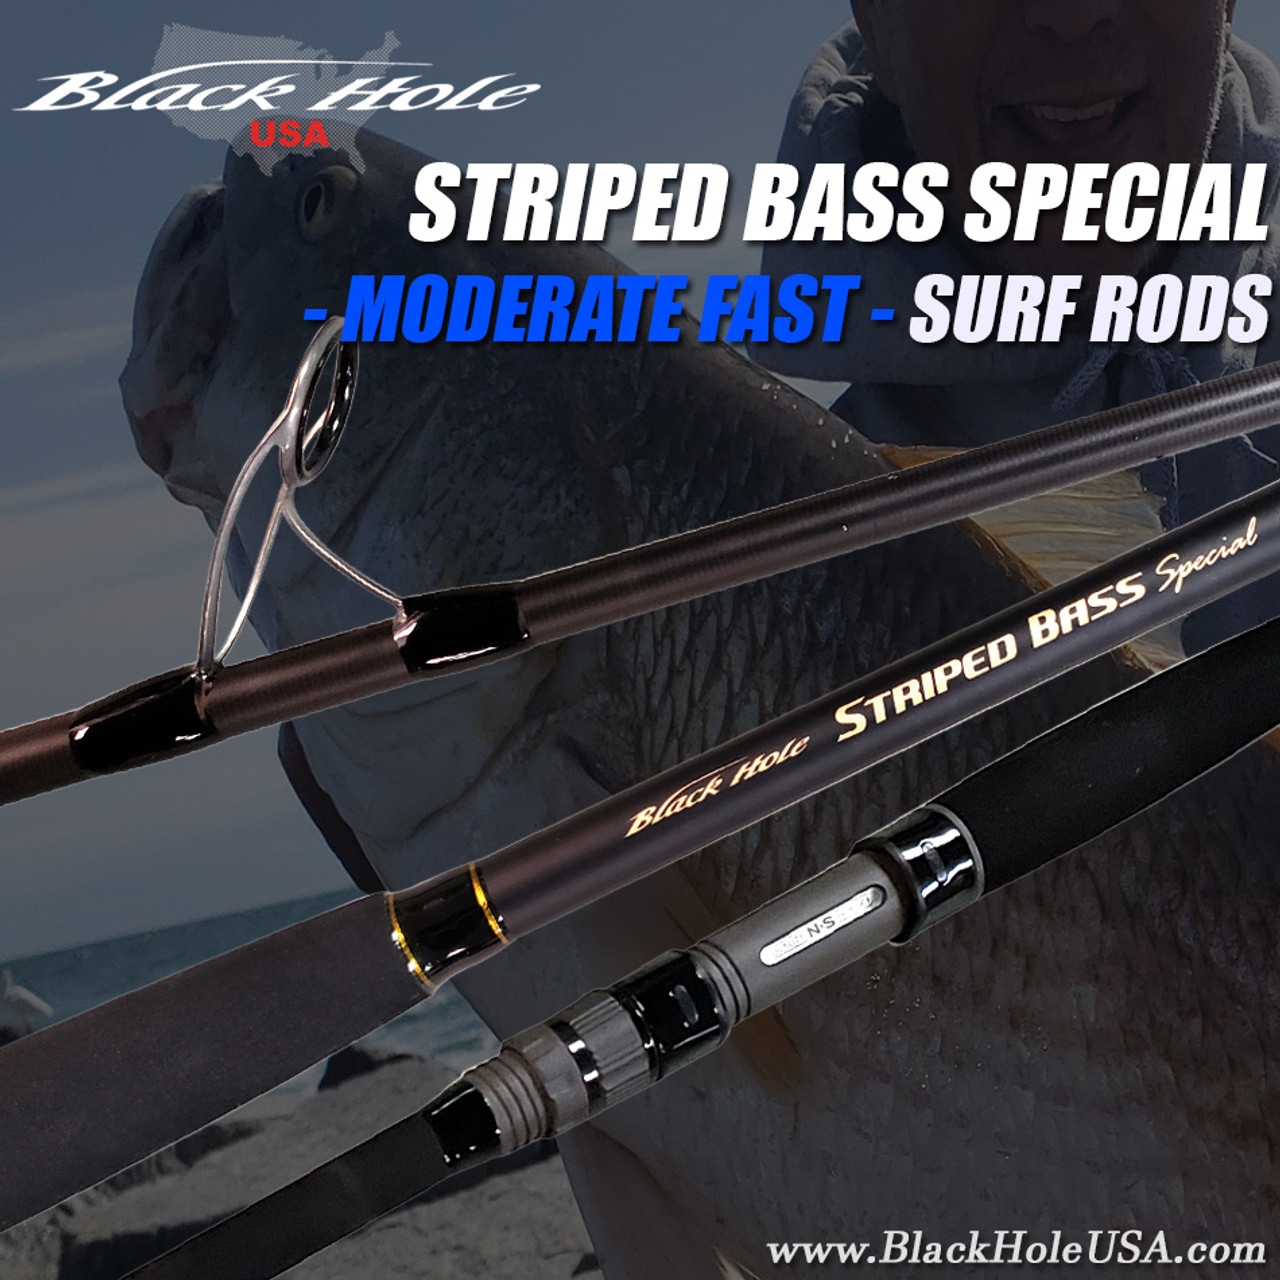 Black Hole USA Striped Bass Special MODERATE FAST Surf Rods, Black